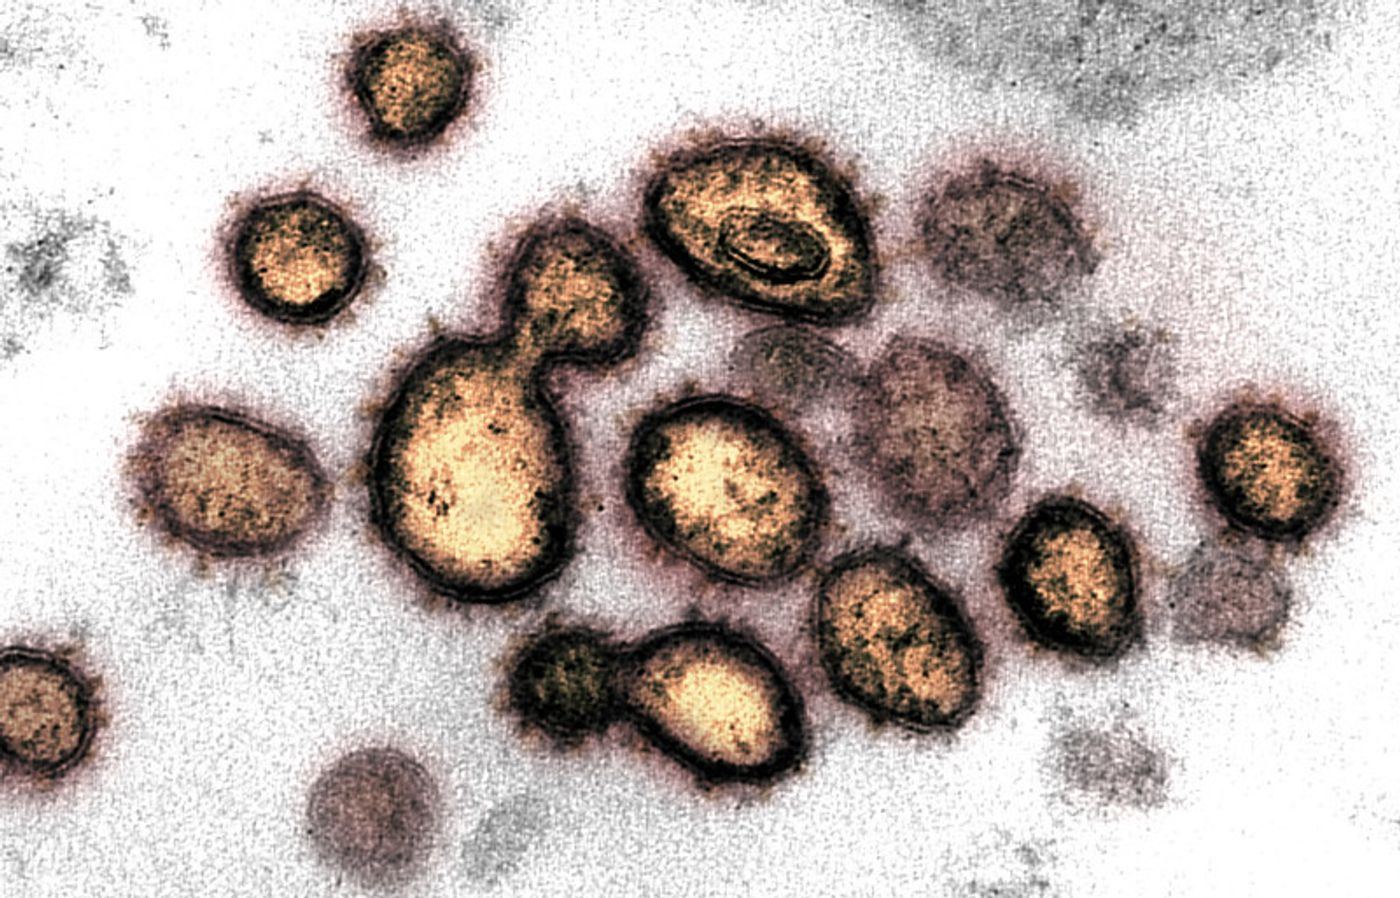 This transmission electron microscope image shows SARS-CoV-2, the virus that causes COVID-19, isolated from a patient in the U.S. Virus particles are shown emerging from the surface of cells cultured in the lab. The spikes on the outer edge of the virus particles give coronaviruses their name, crown-like. / Credit: NIAID-RML